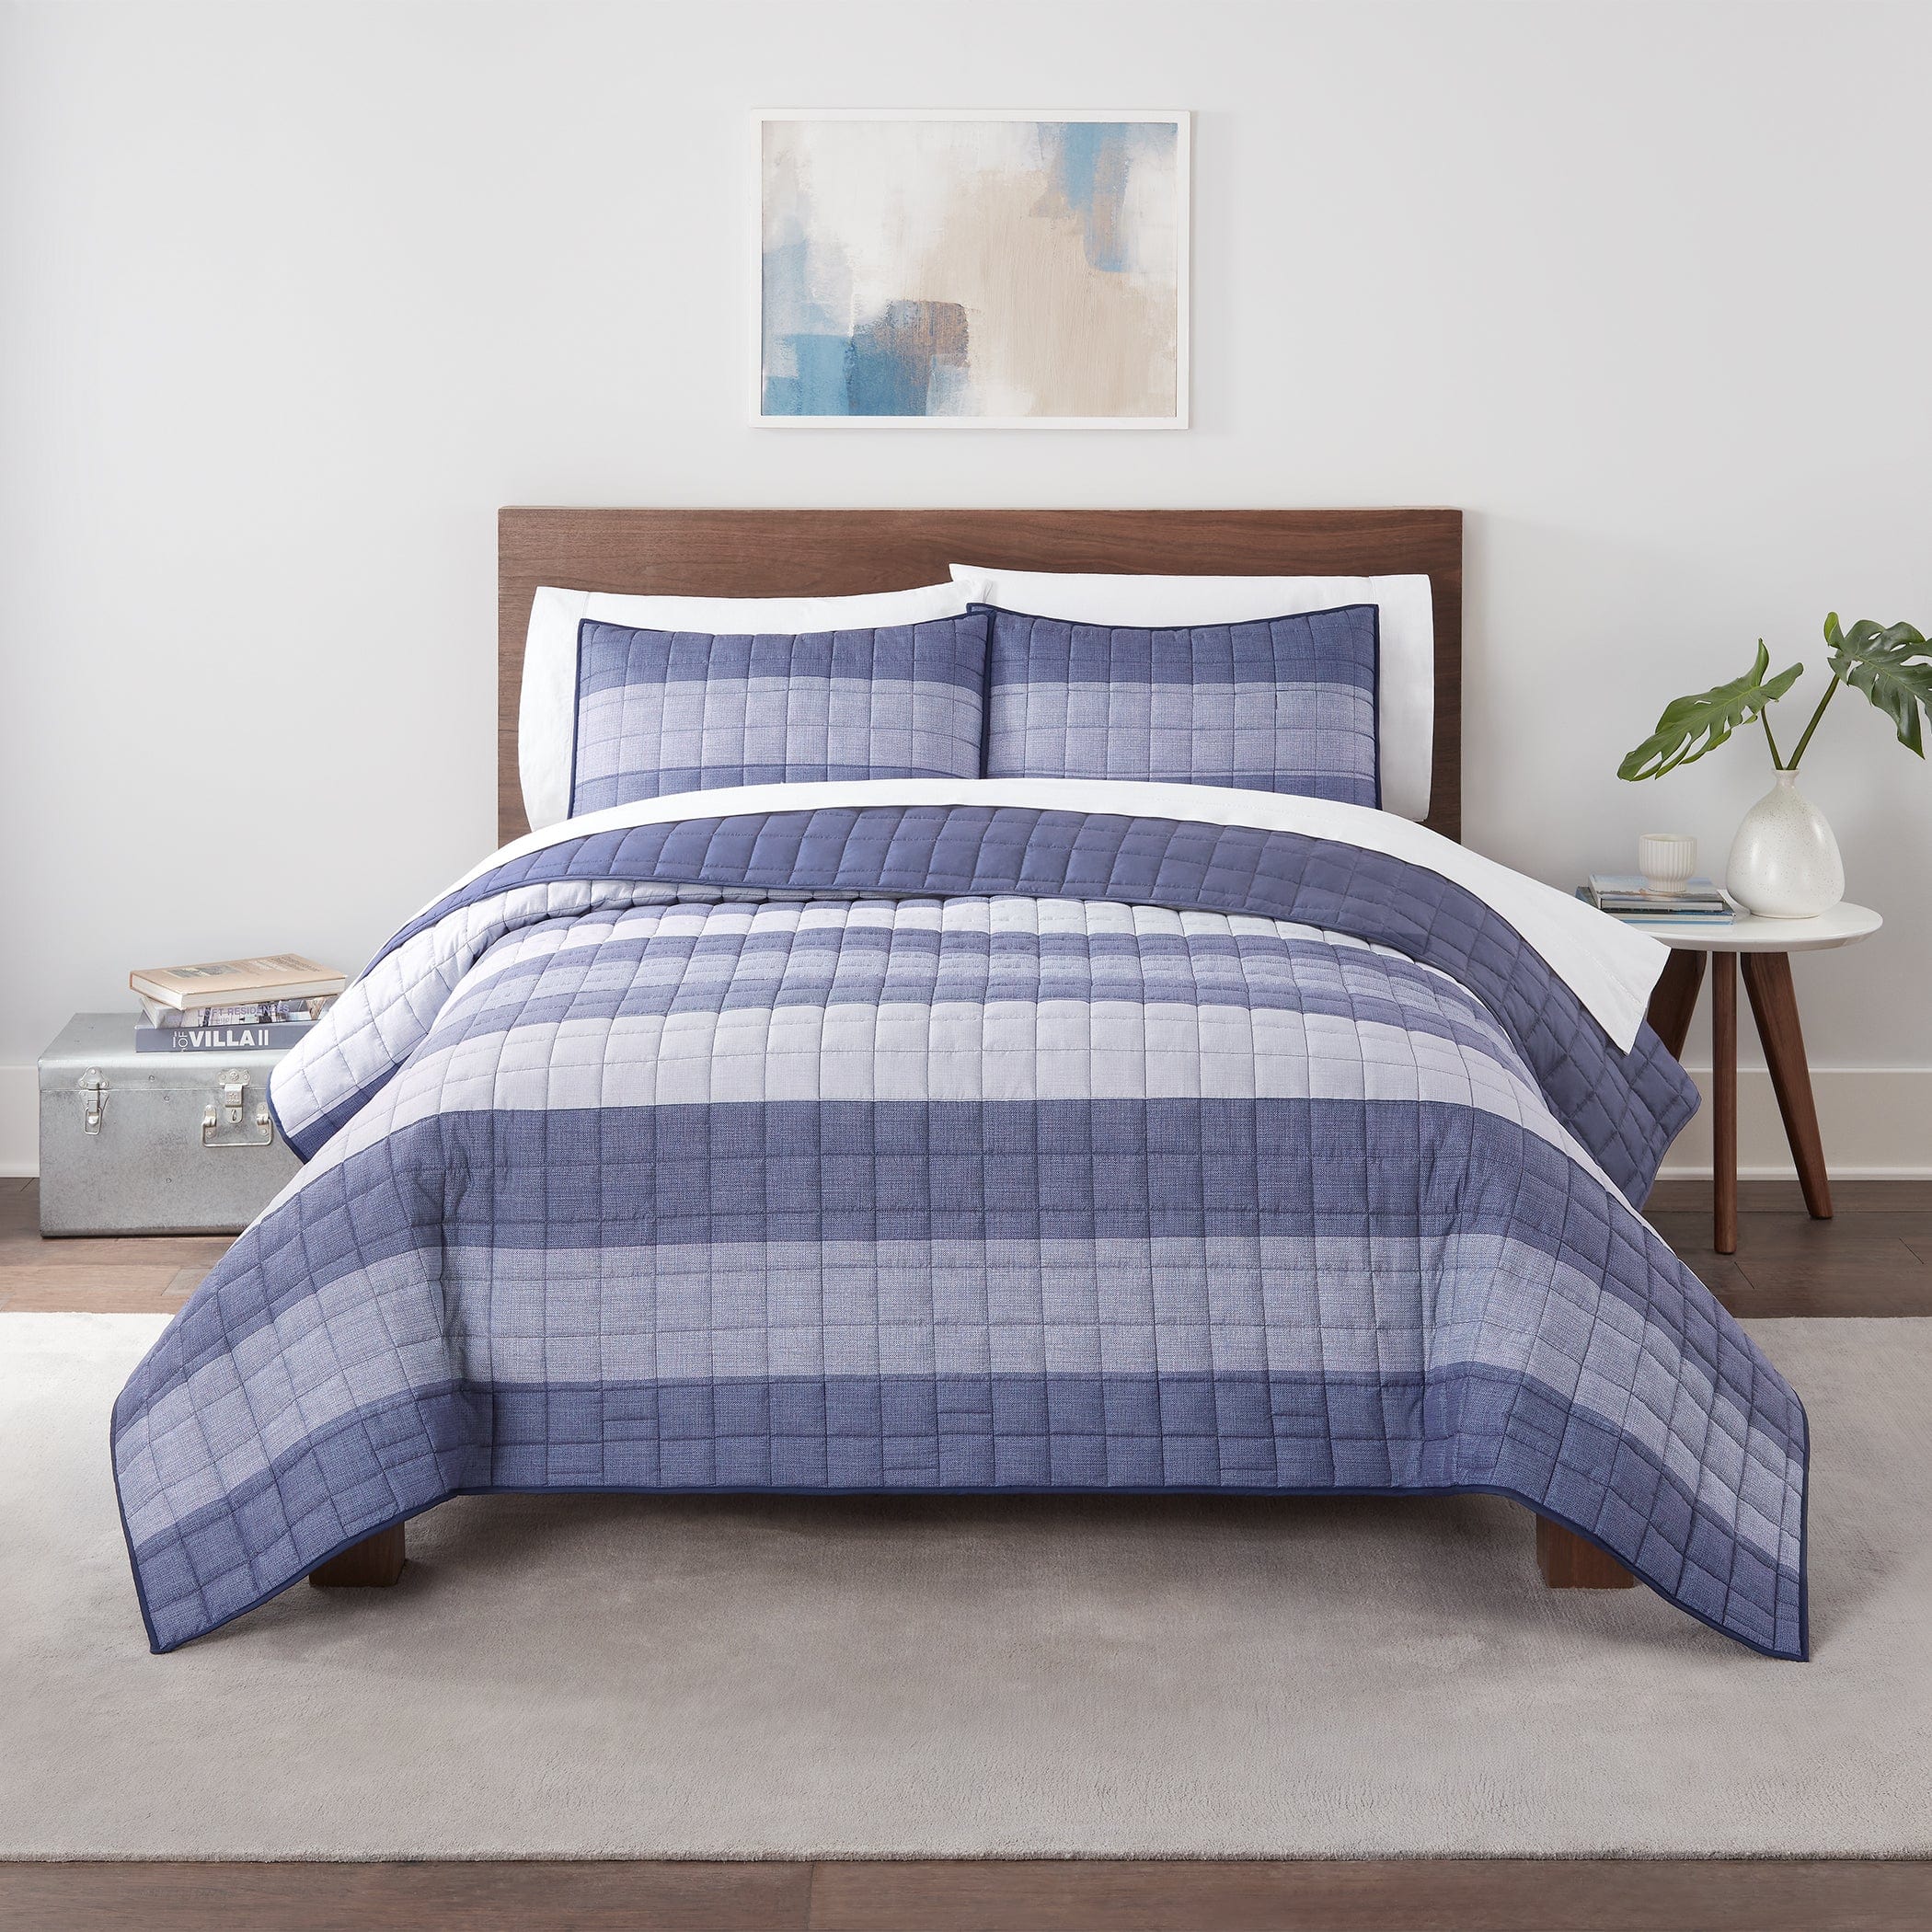 Simply Clean by Serta Textured Stripe Comforter Quilt in Blue Twin/Twin x L